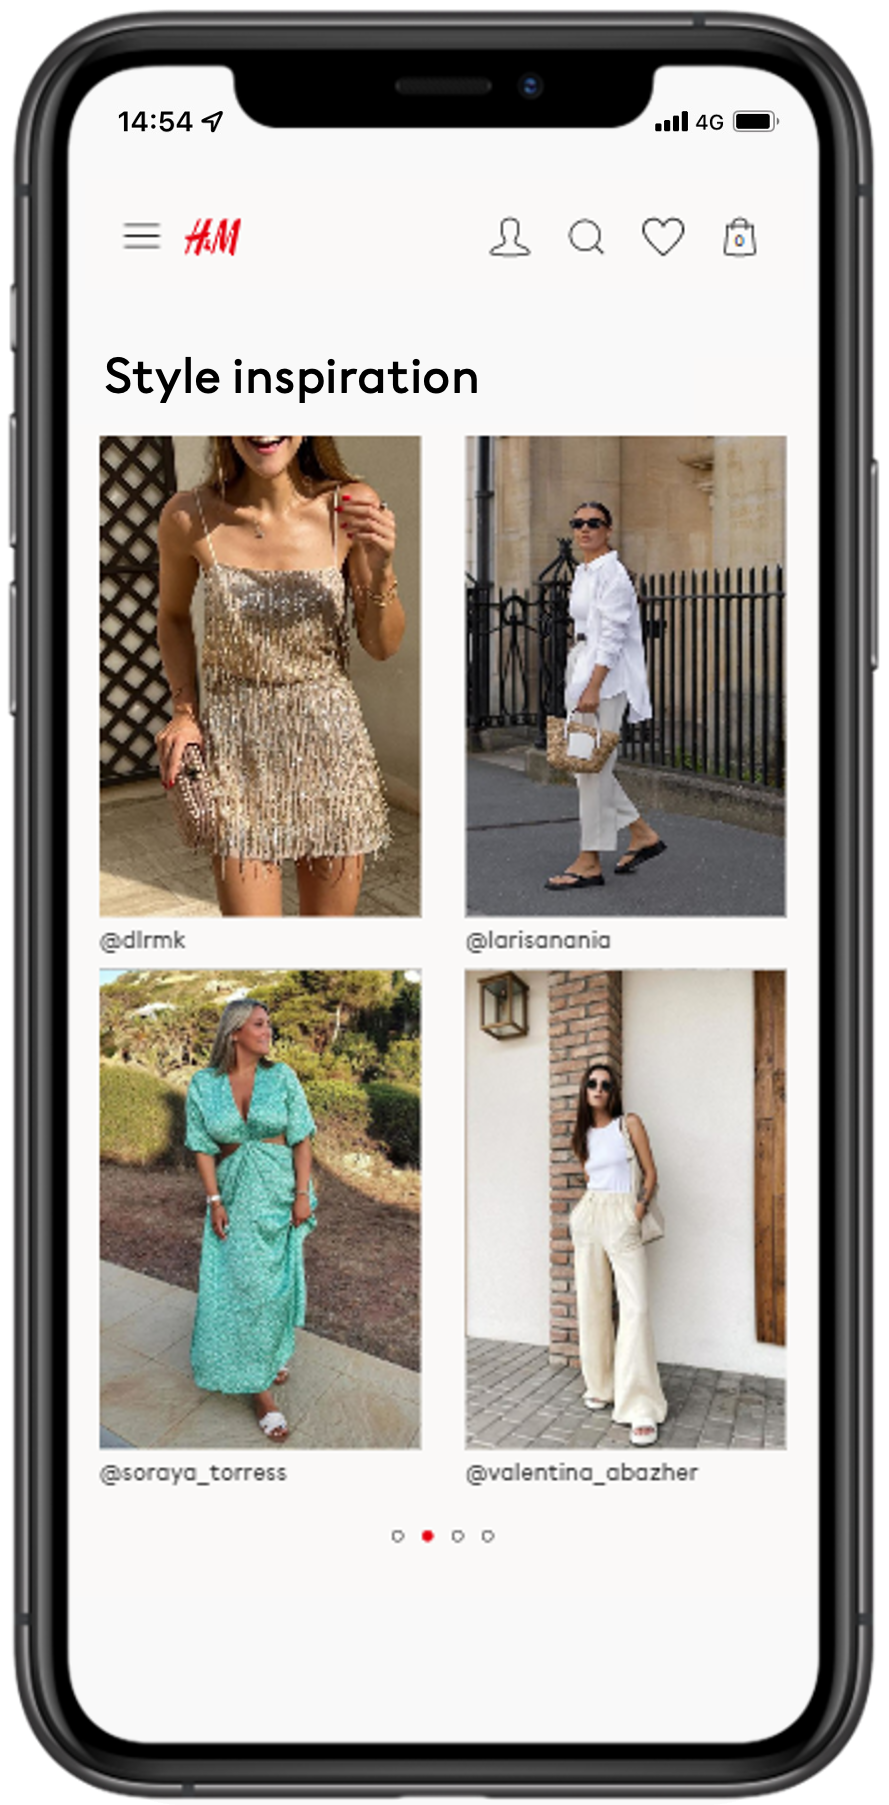 Discover new styles and shop the styles of other customers and influencers with Stylestories.